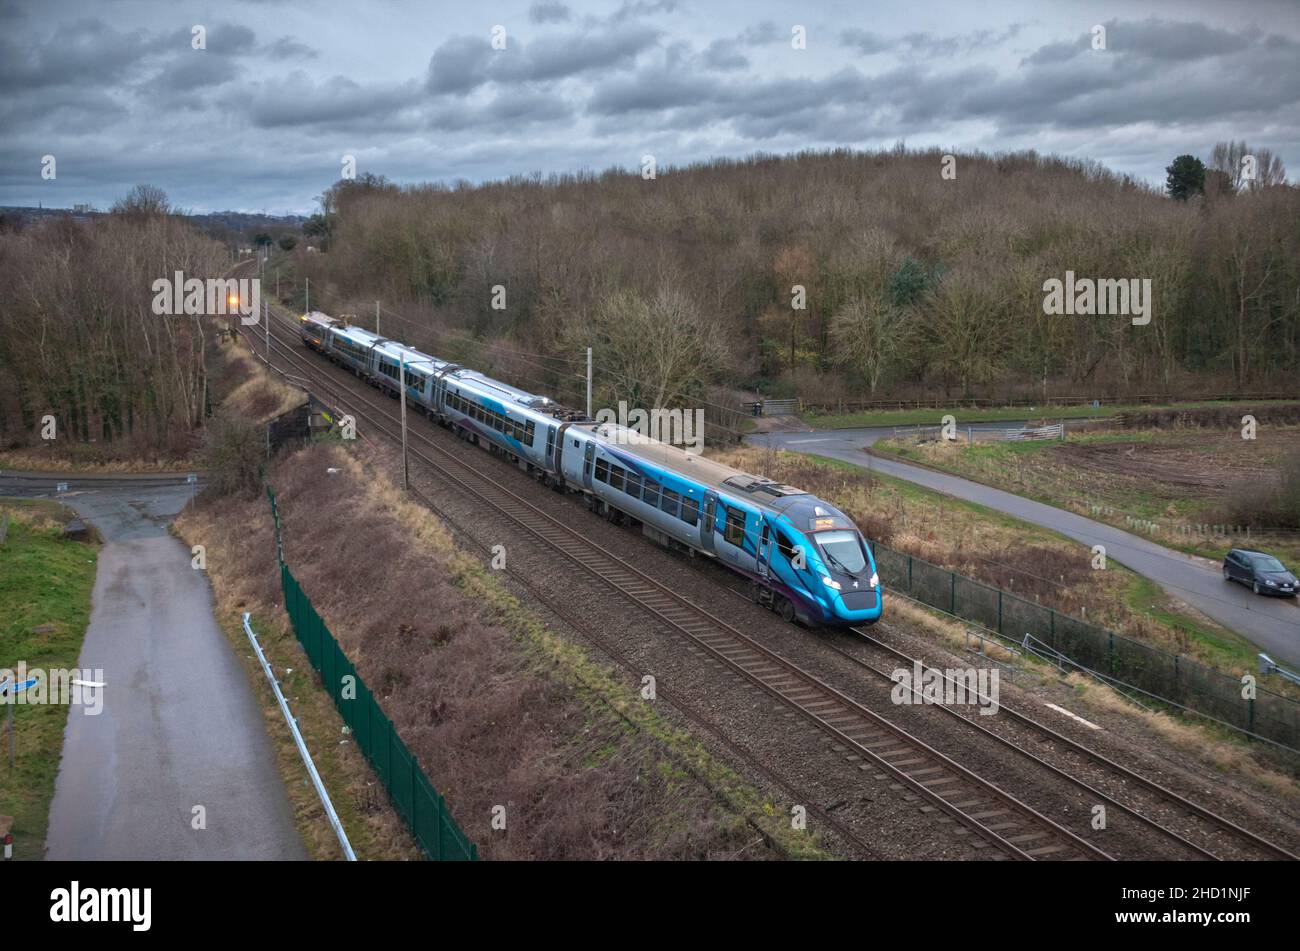 First Transpennine Express CAF class 397 electric express train on the west coast mainline in Lancashire Stock Photo